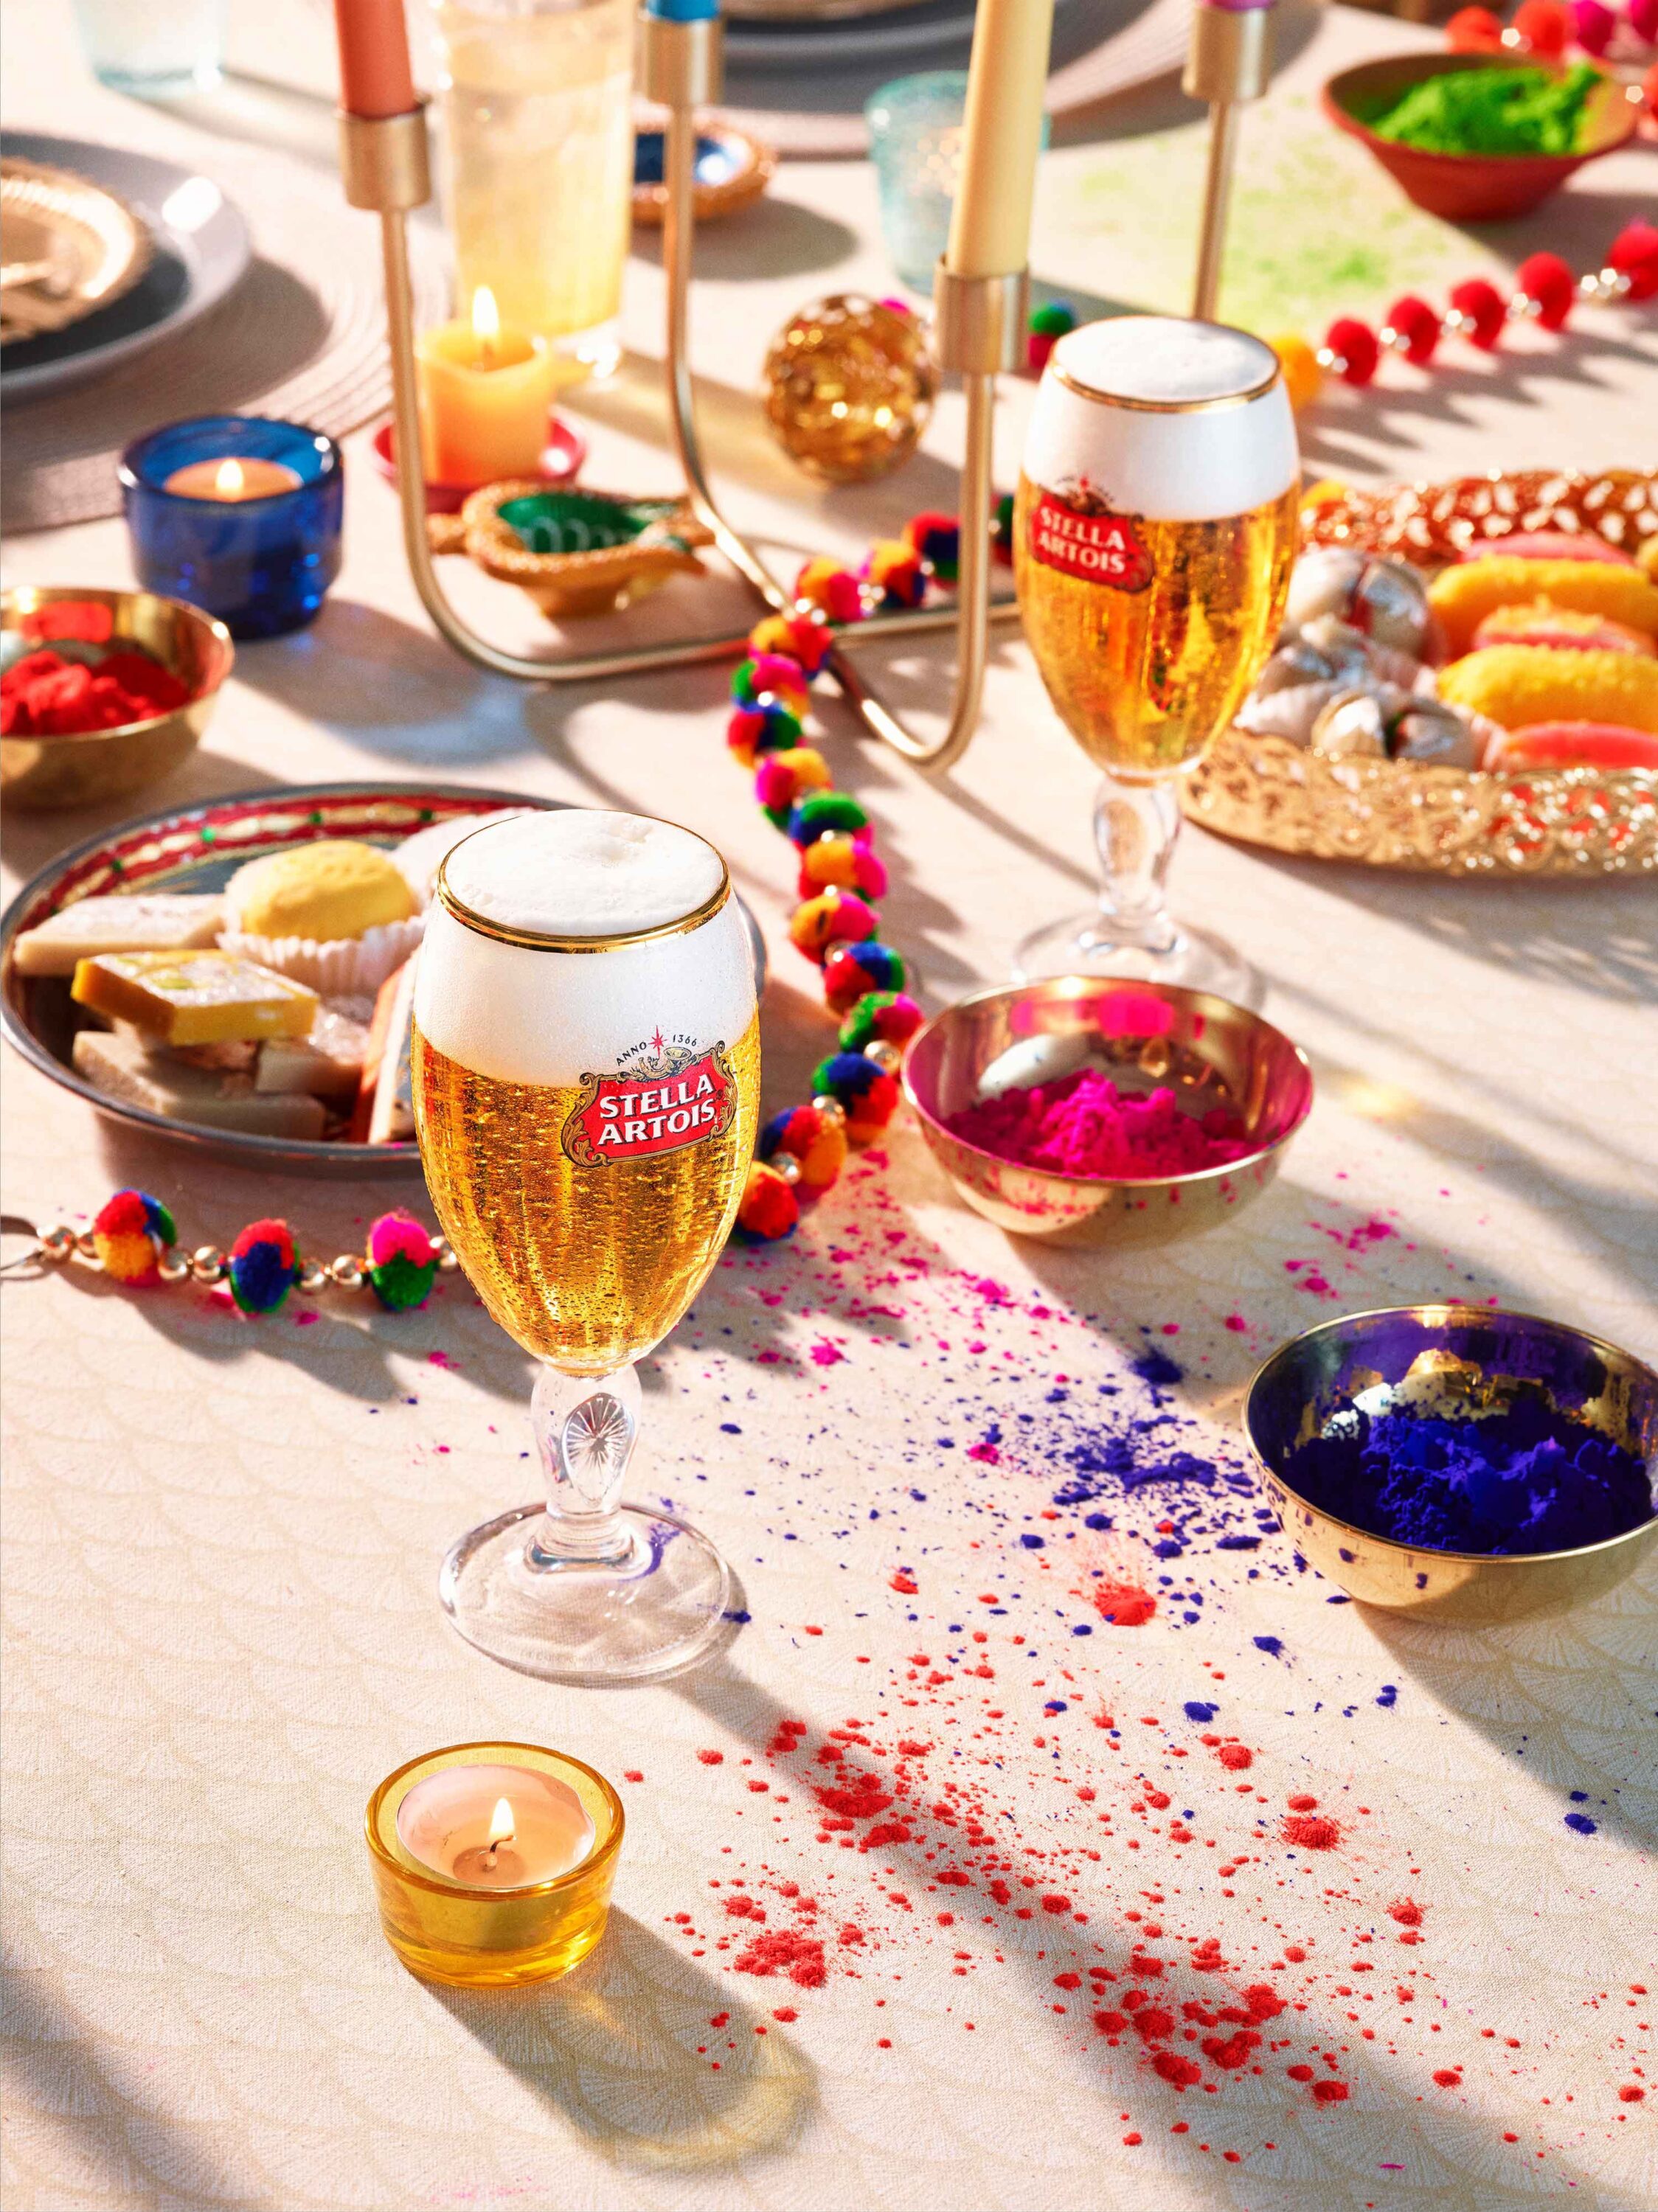 WrenAgency_FelicityMcCabe-WAS_StellaArtois_Tablescapes_Holi_Sideview_3_V1_sRGB